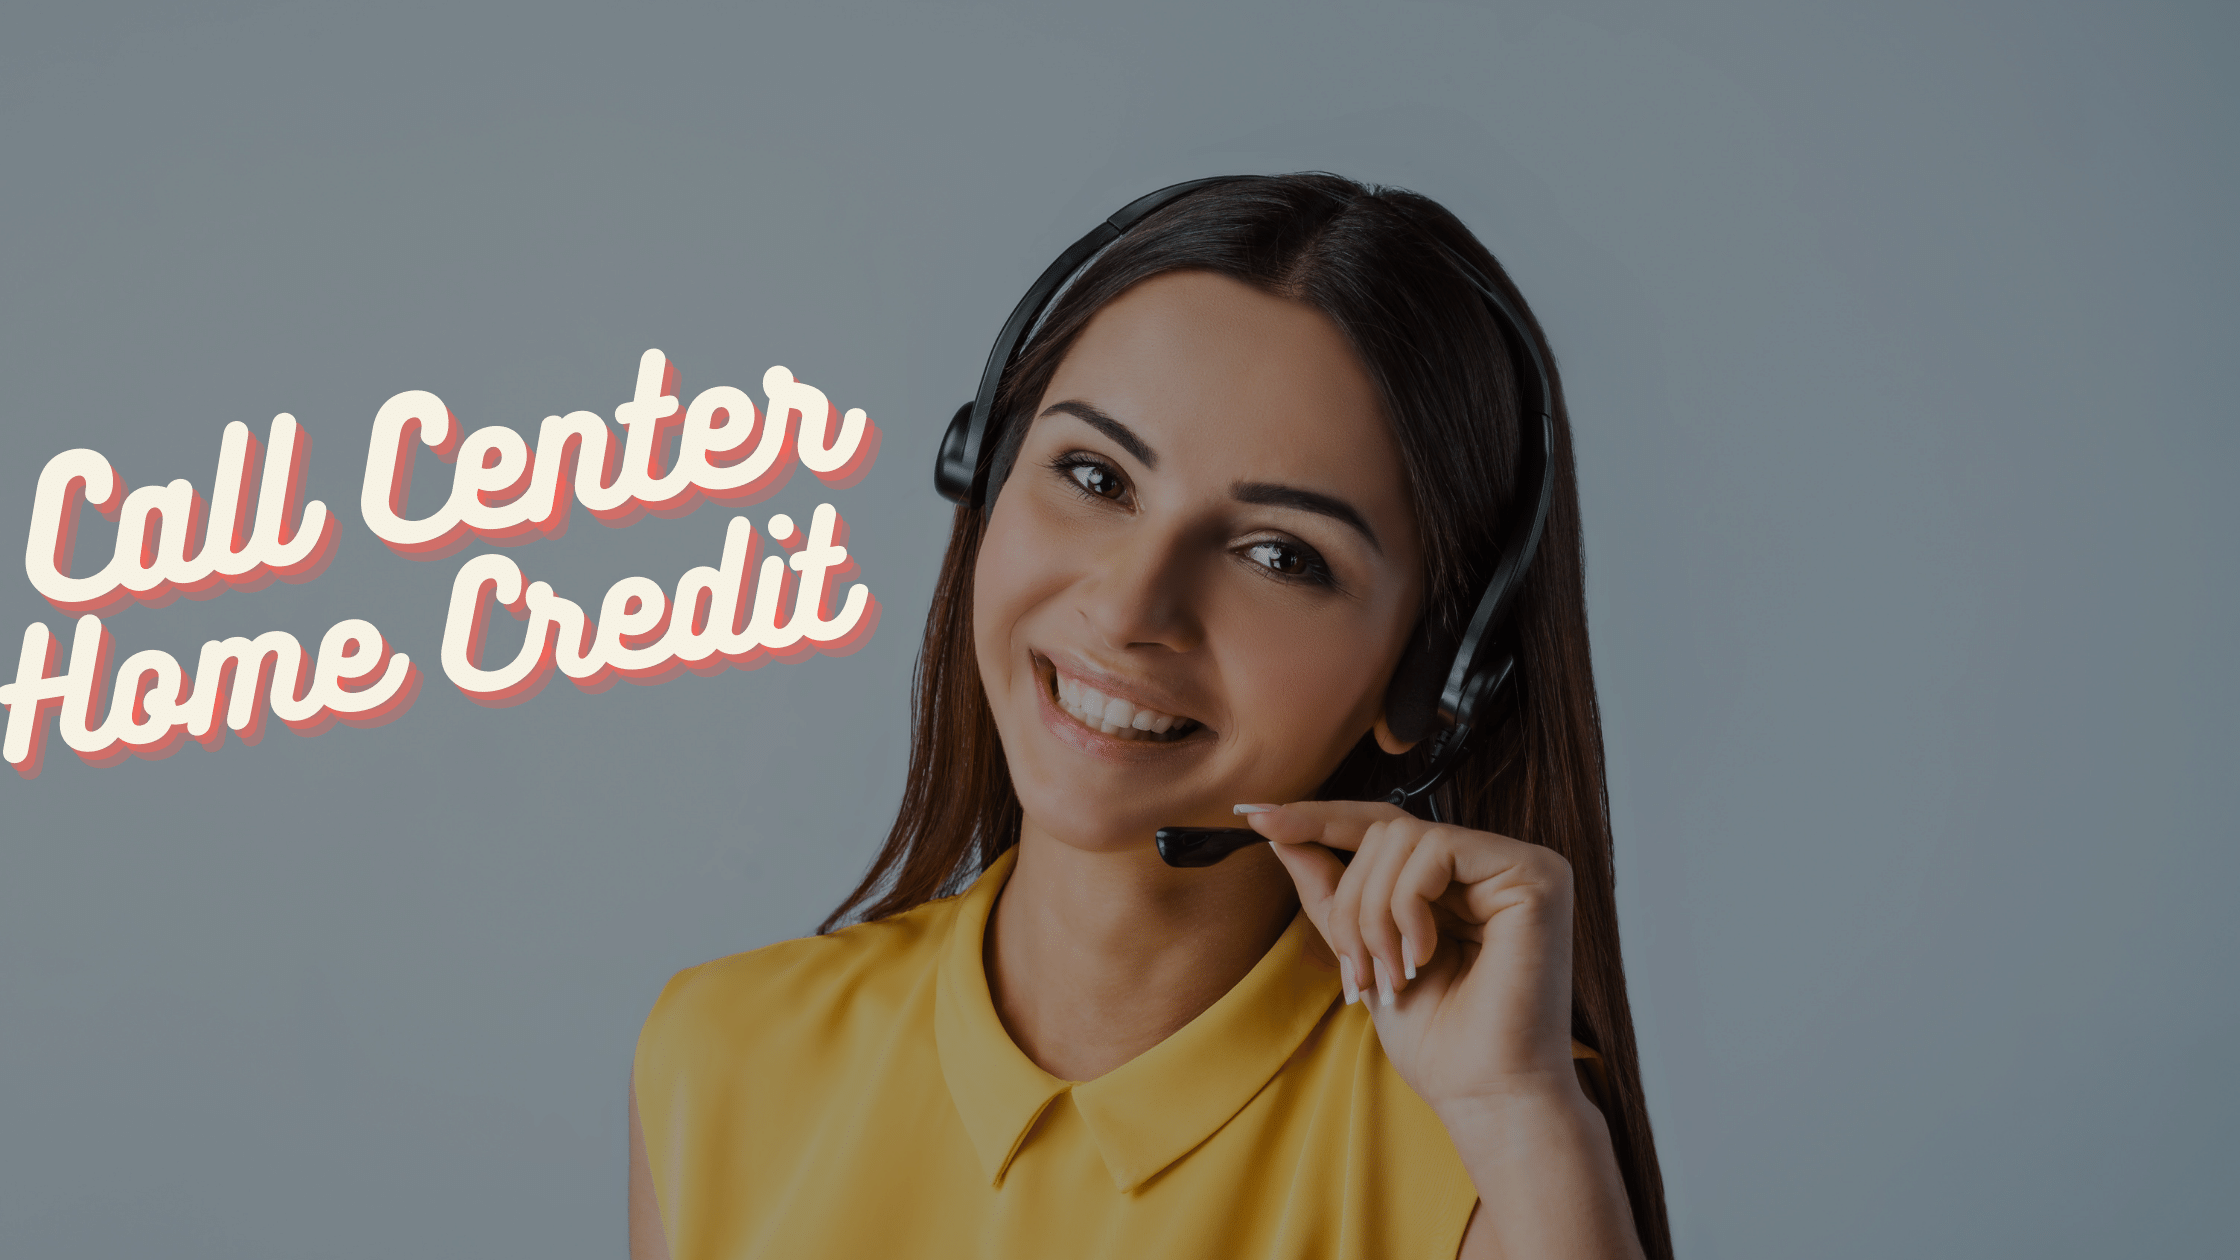 Call center Home Credit